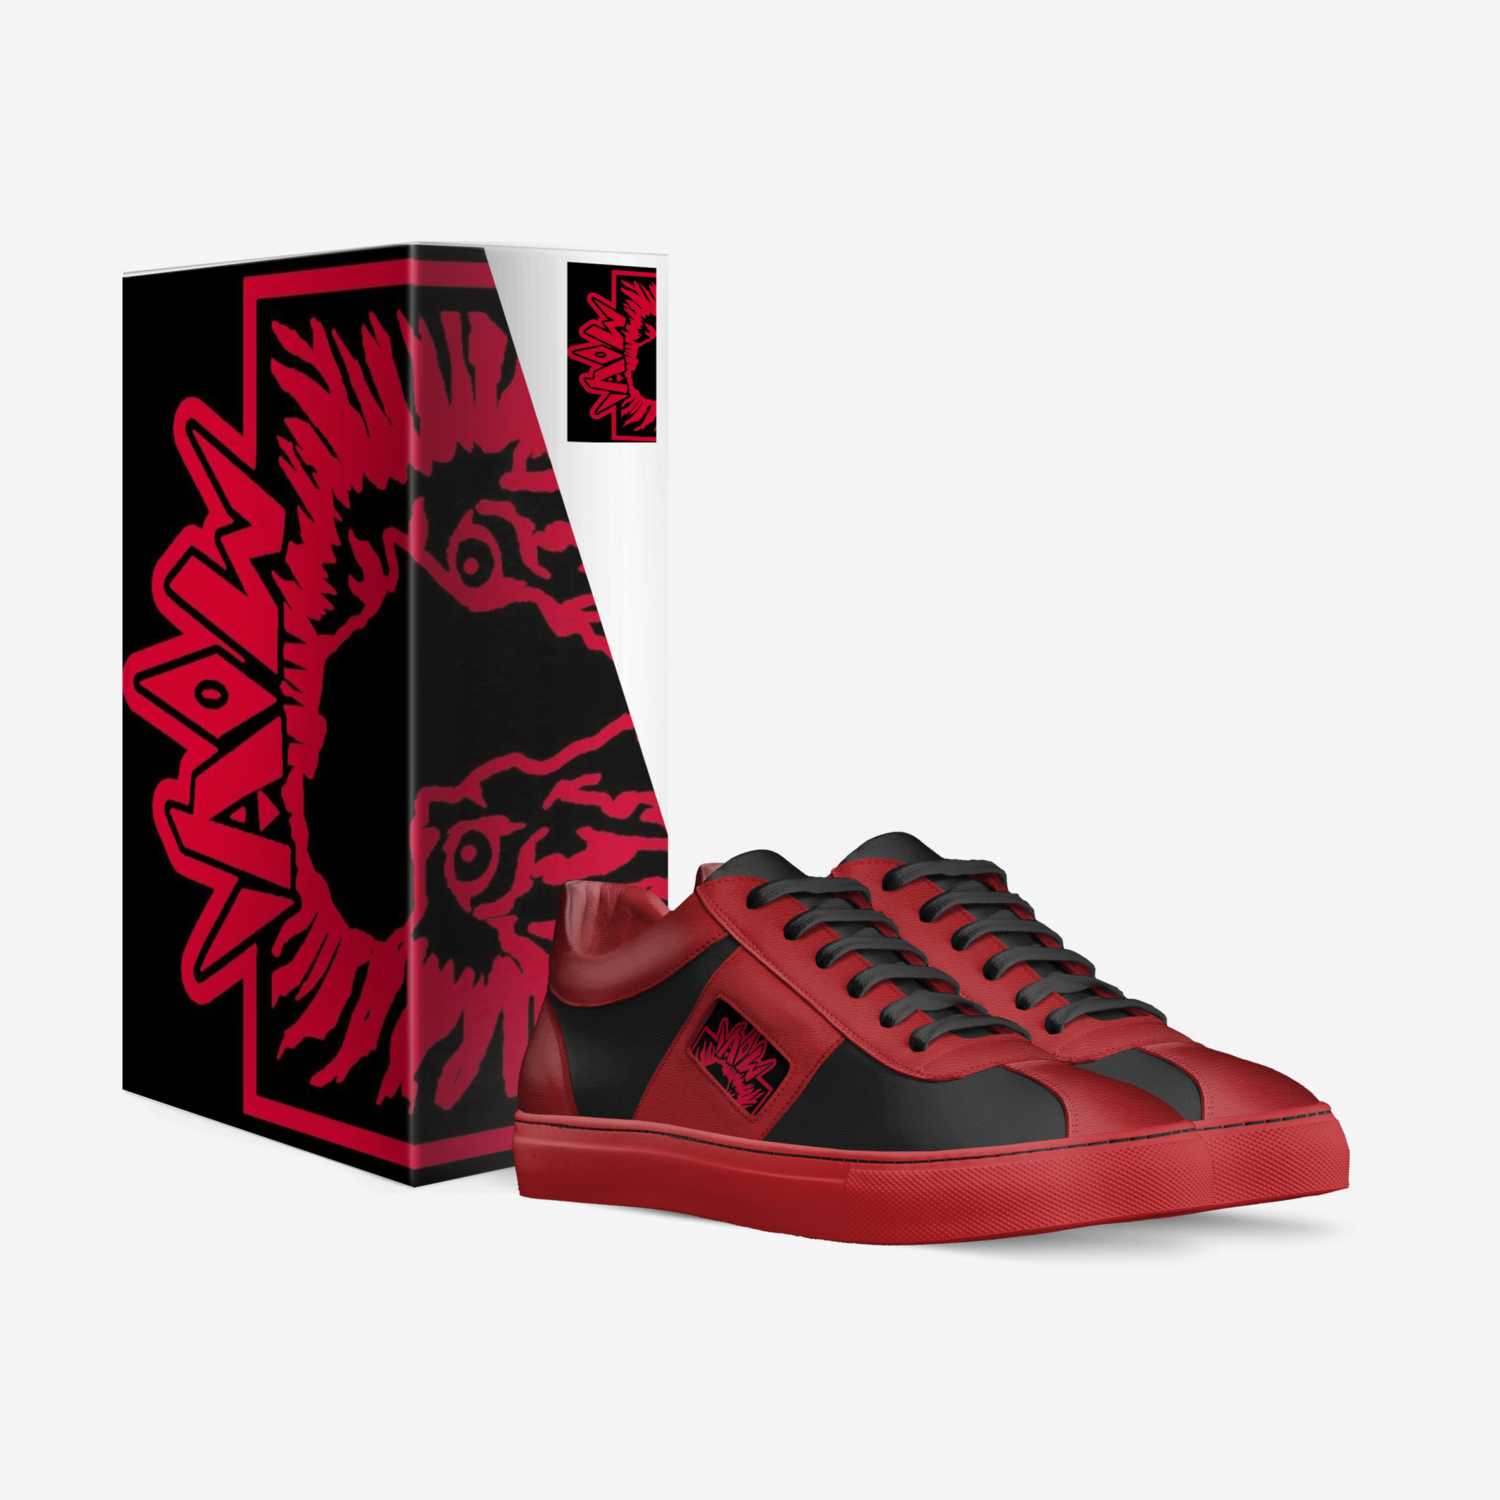 DUBLOWS RED/BLACK custom made in Italy shoes by Adrian Willis | Box view